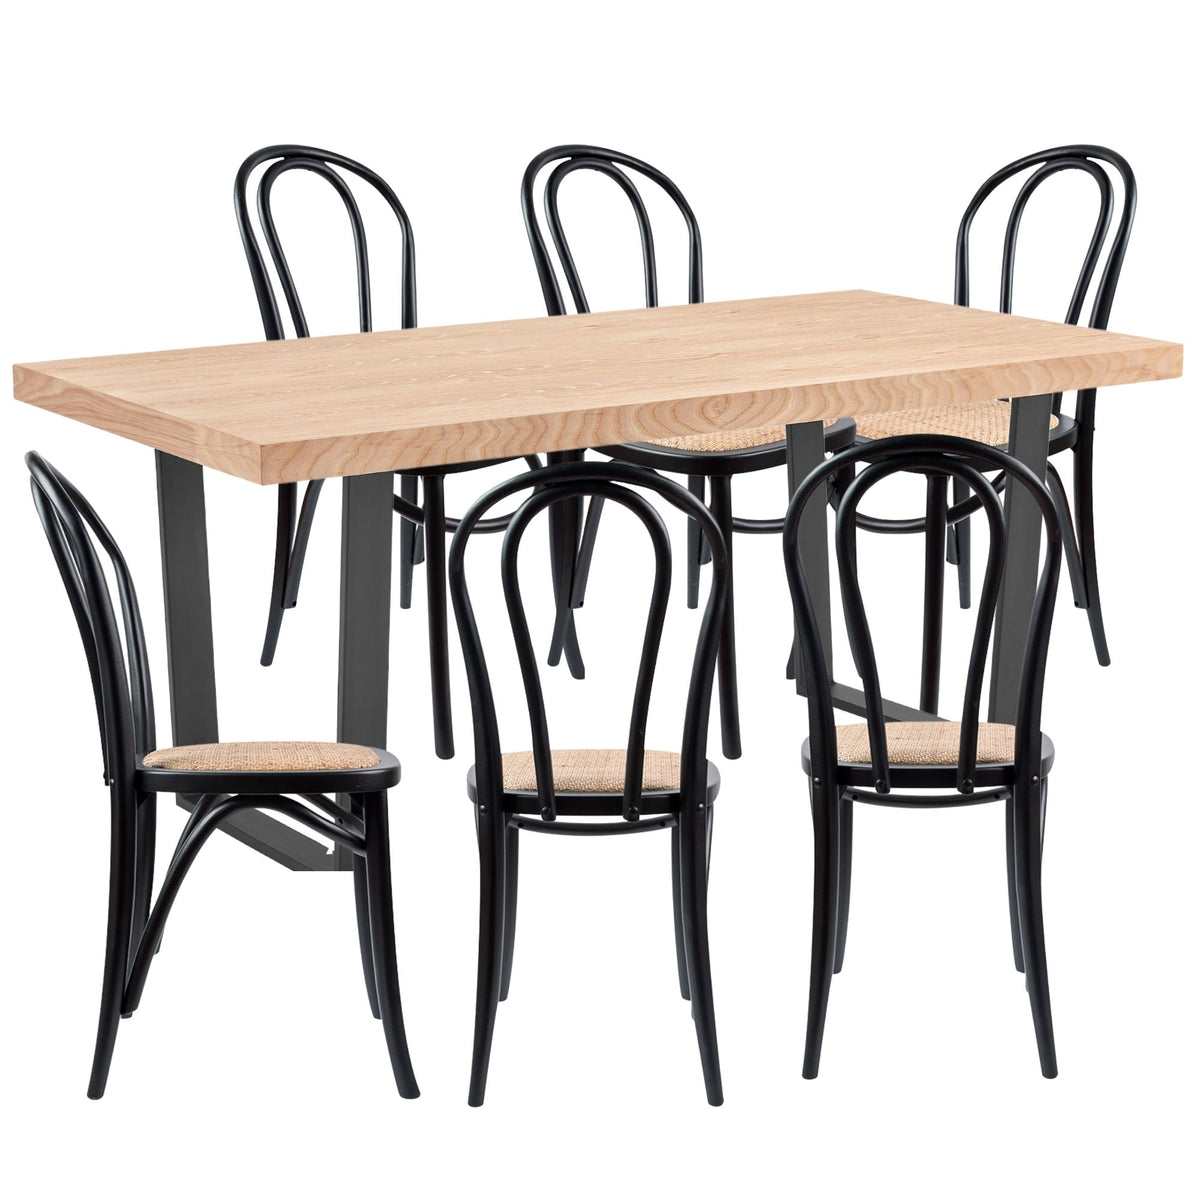 Petunia  7pc 180cm Dining Table Set 6 Arched Back Chair Elm Timber Wood